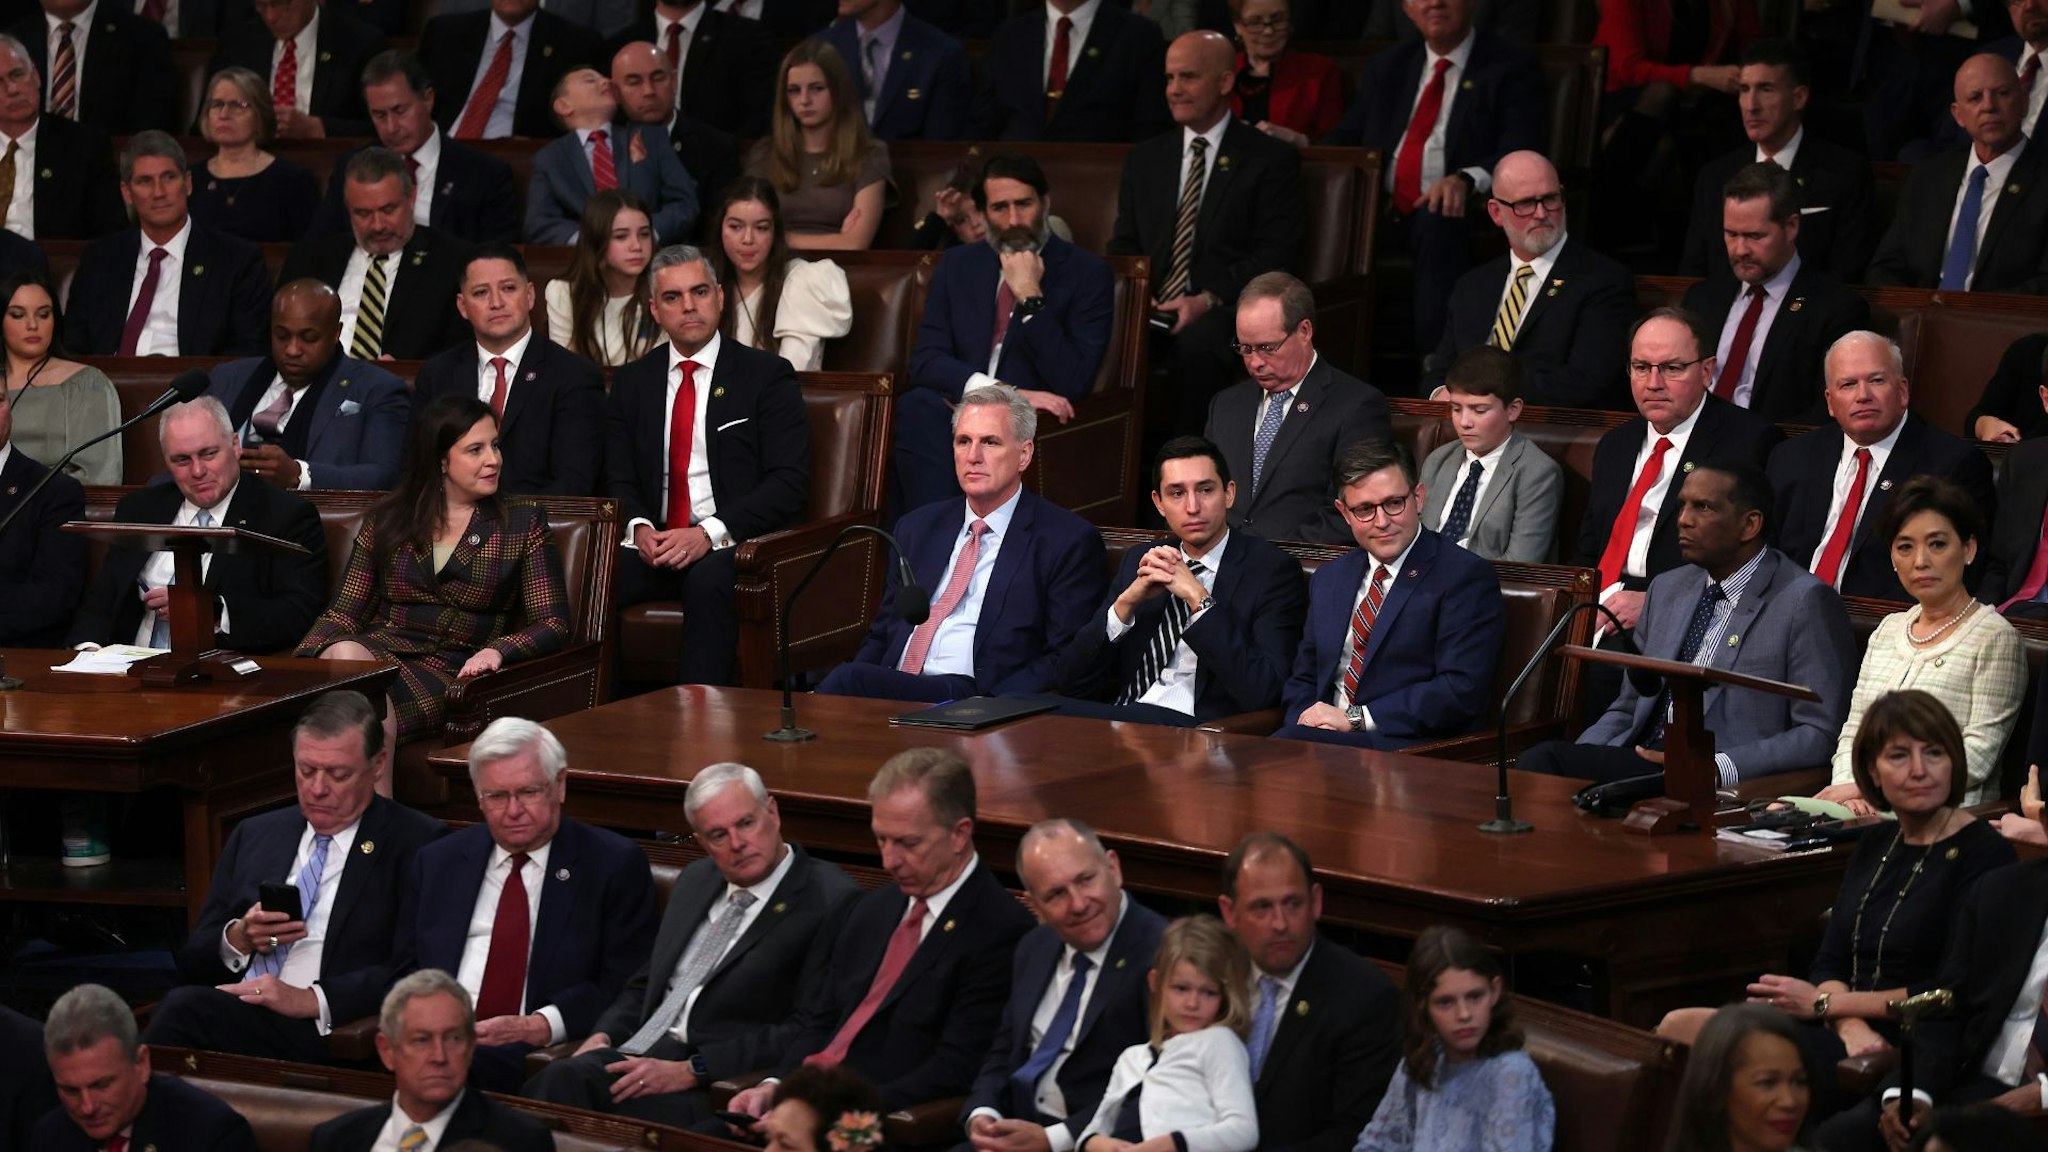 WASHINGTON, DC - JANUARY 03: U.S. House Minority Leader Kevin McCarthy (R-CA) (C) sits alongside colleagues as Representatives cast their votes for Speaker of the House on the first day of the 118th Congress in the House Chamber of the U.S. Capitol Building on January 03, 2023 in Washington, DC. Today members of the 118th Congress will be sworn-in and the House of Representatives will elect a new Speaker of the House.